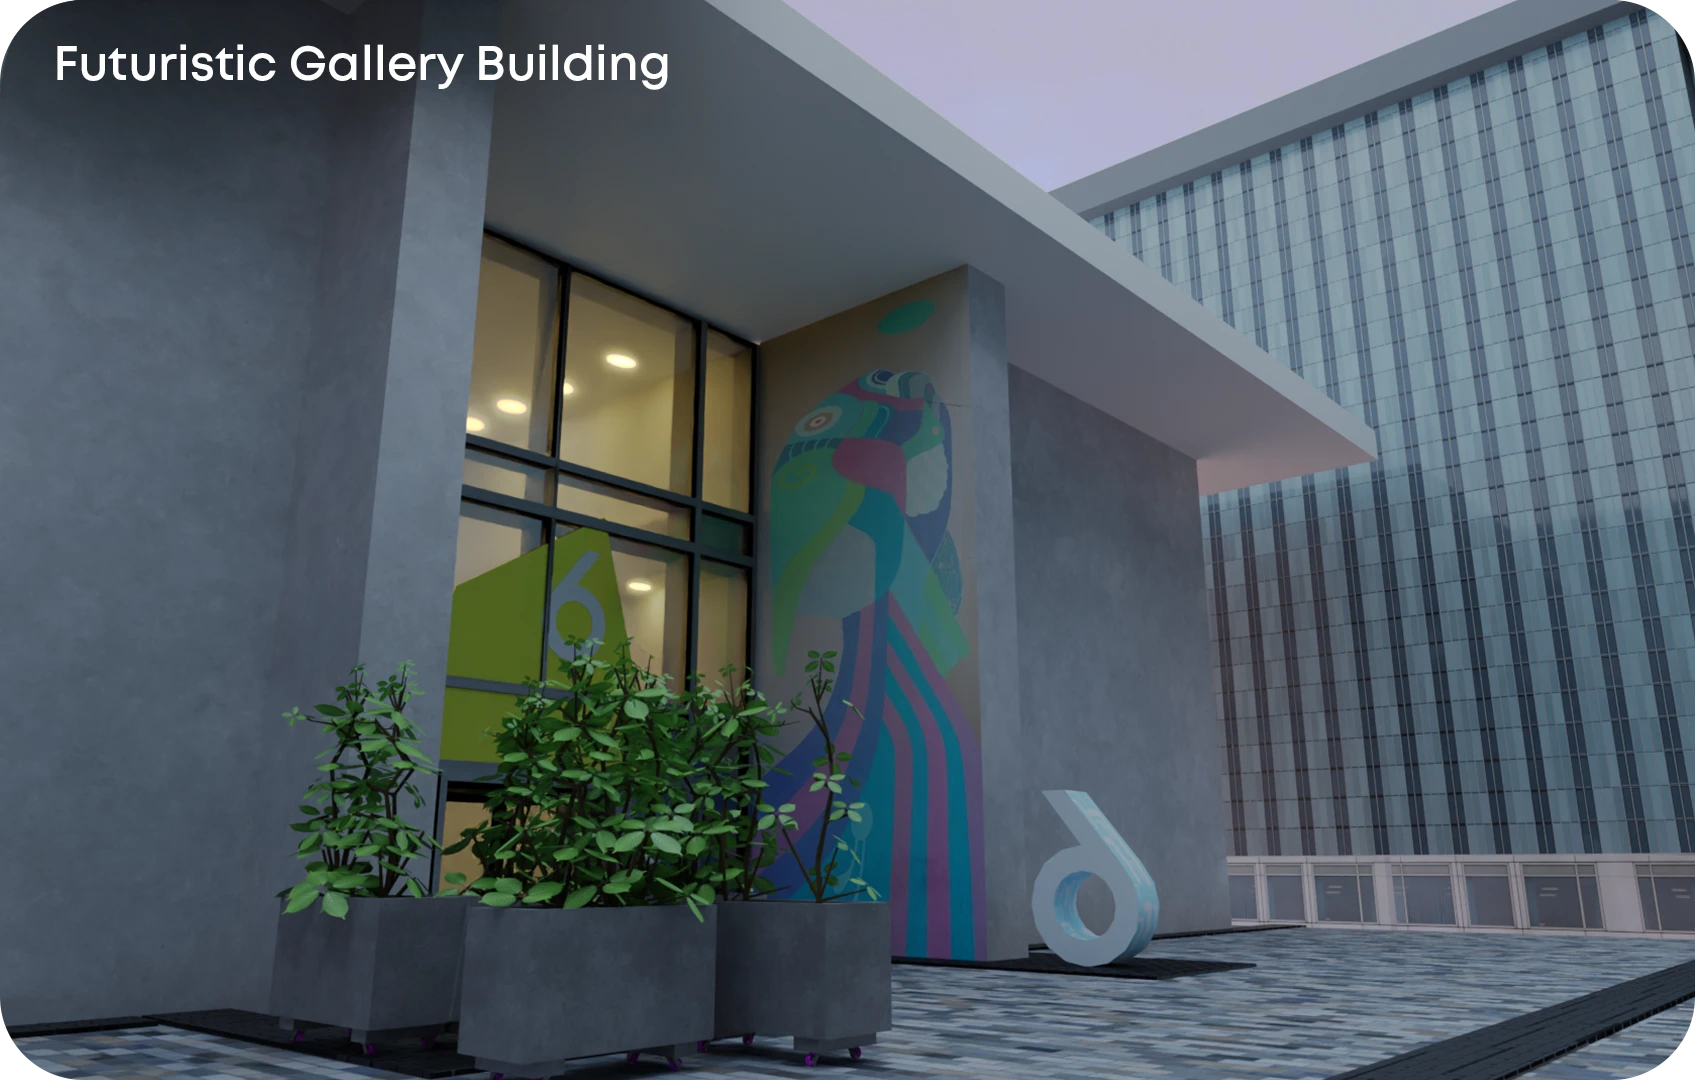 3934-futuristic-gallery-building-1.png